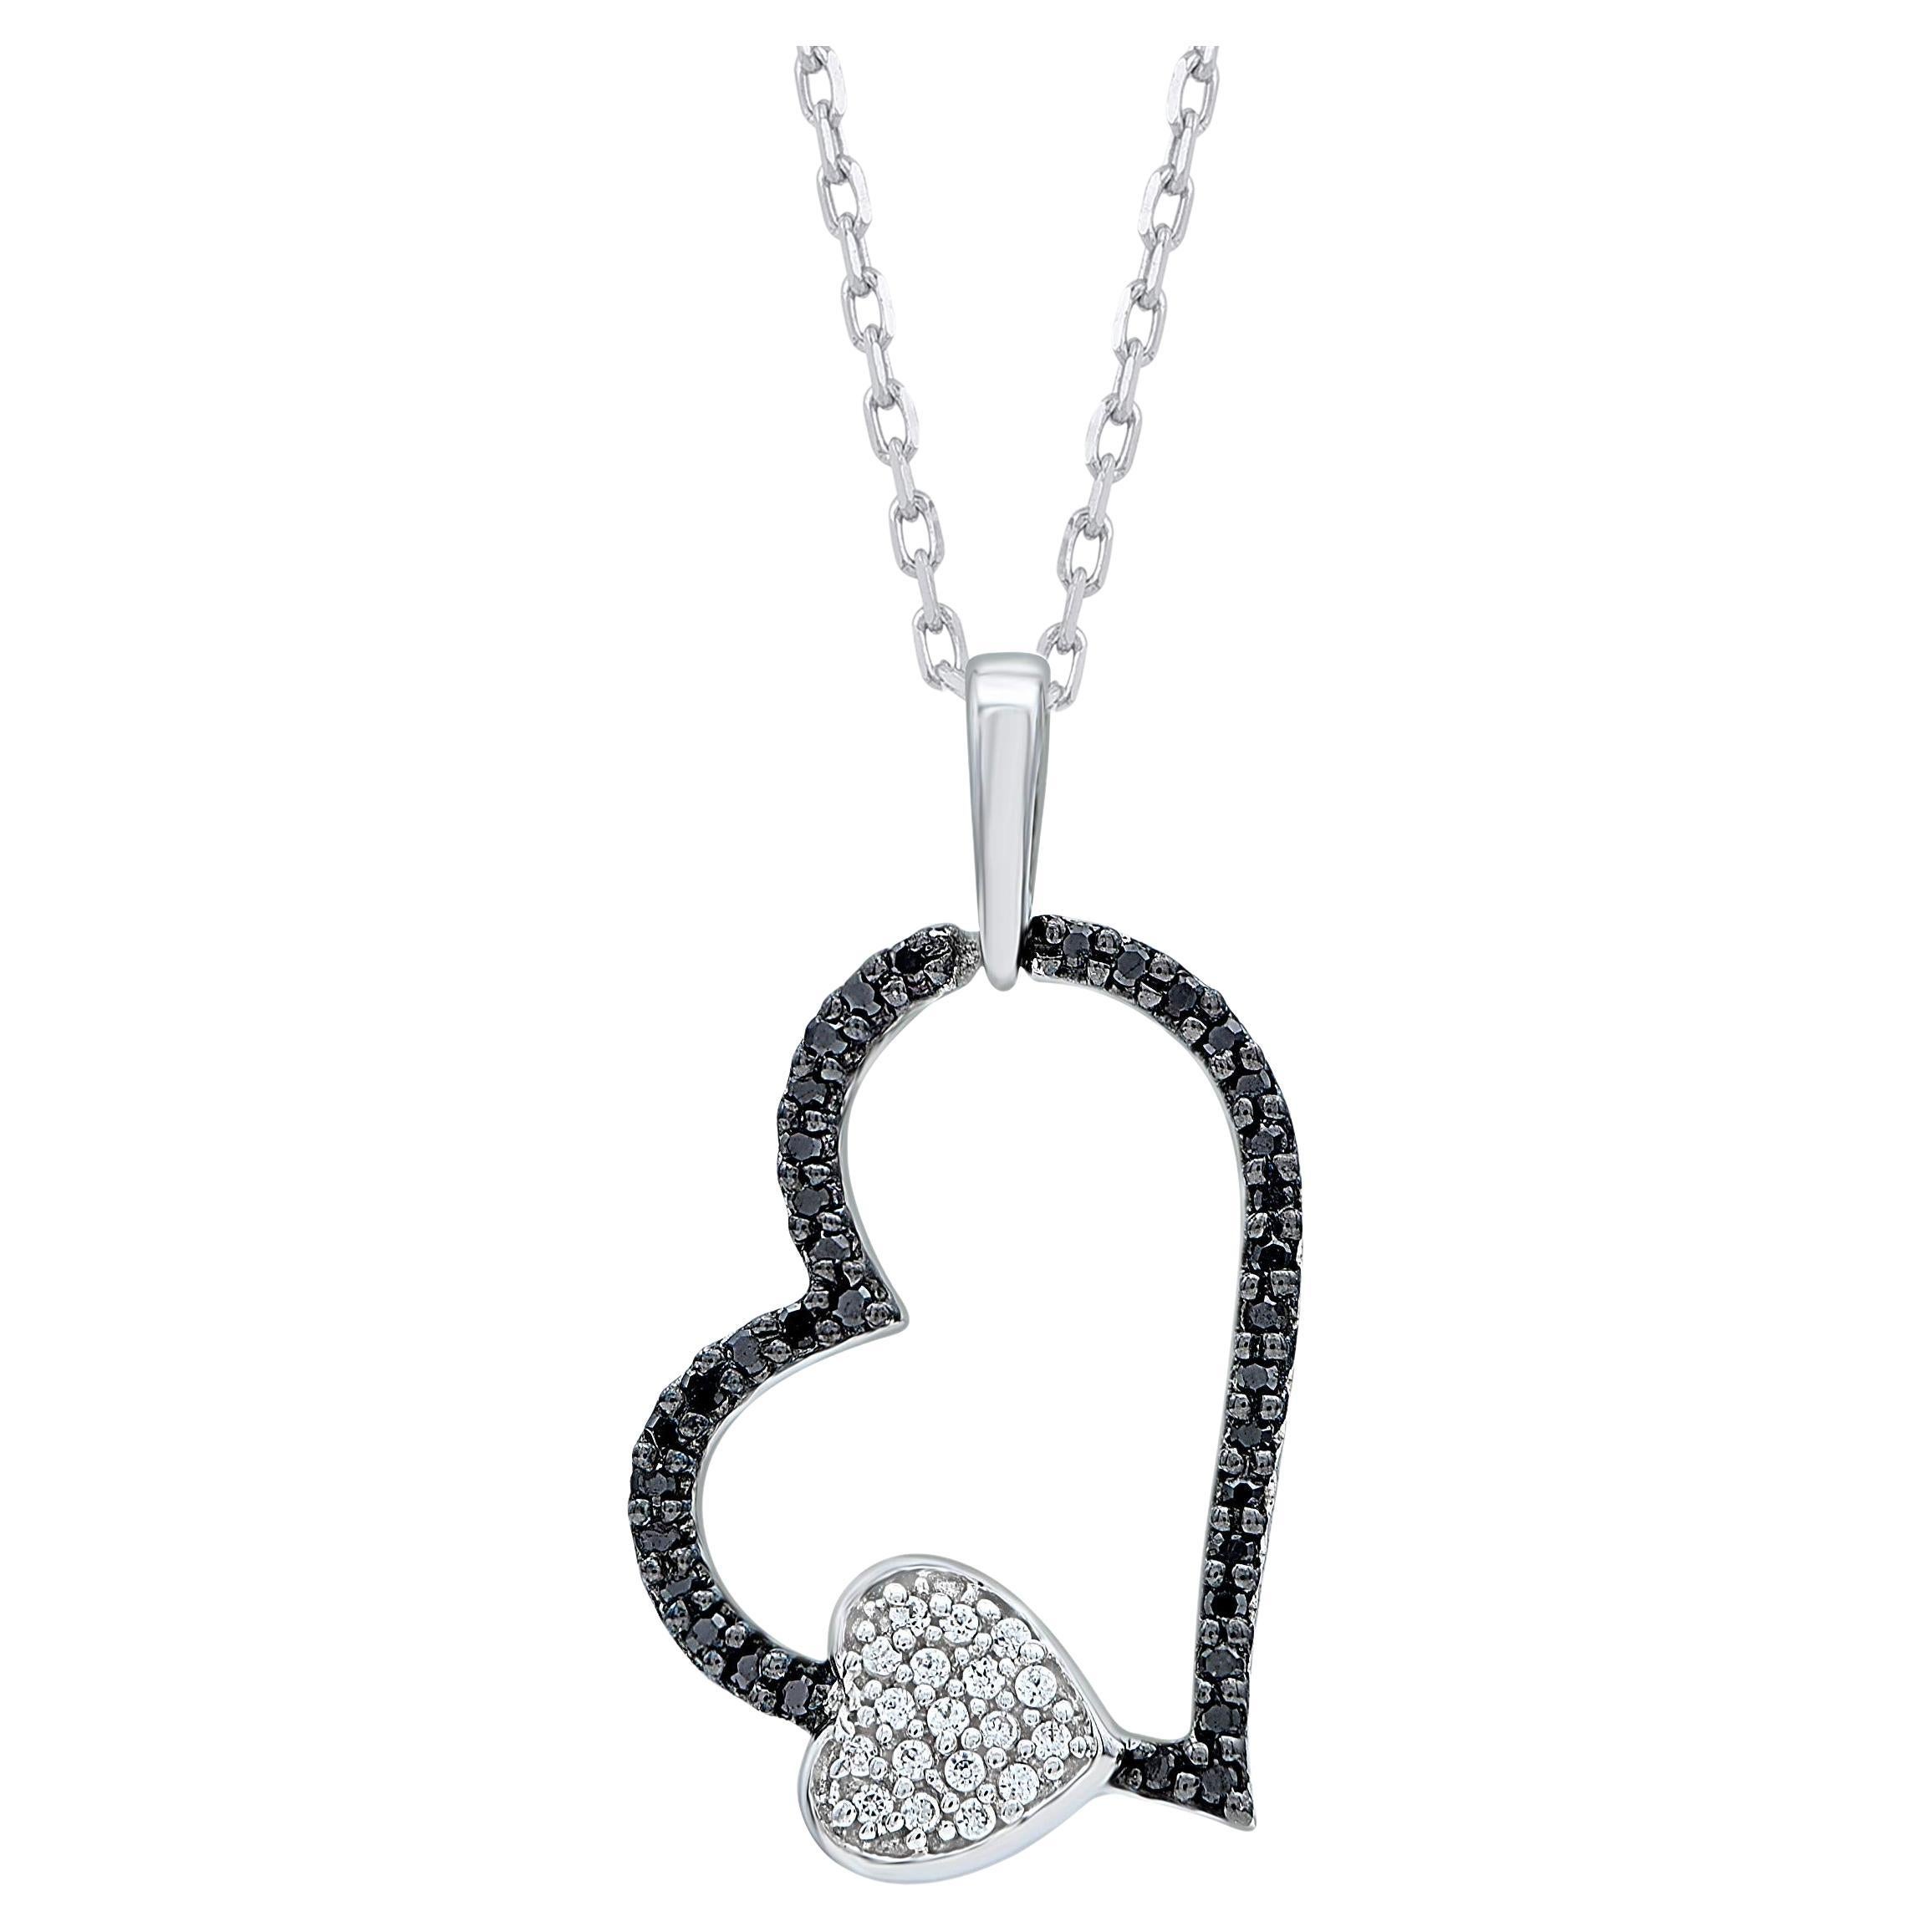 TJD 0.10 Carat White and Black Treated Diamond 14KT White Gold Heart Necklace